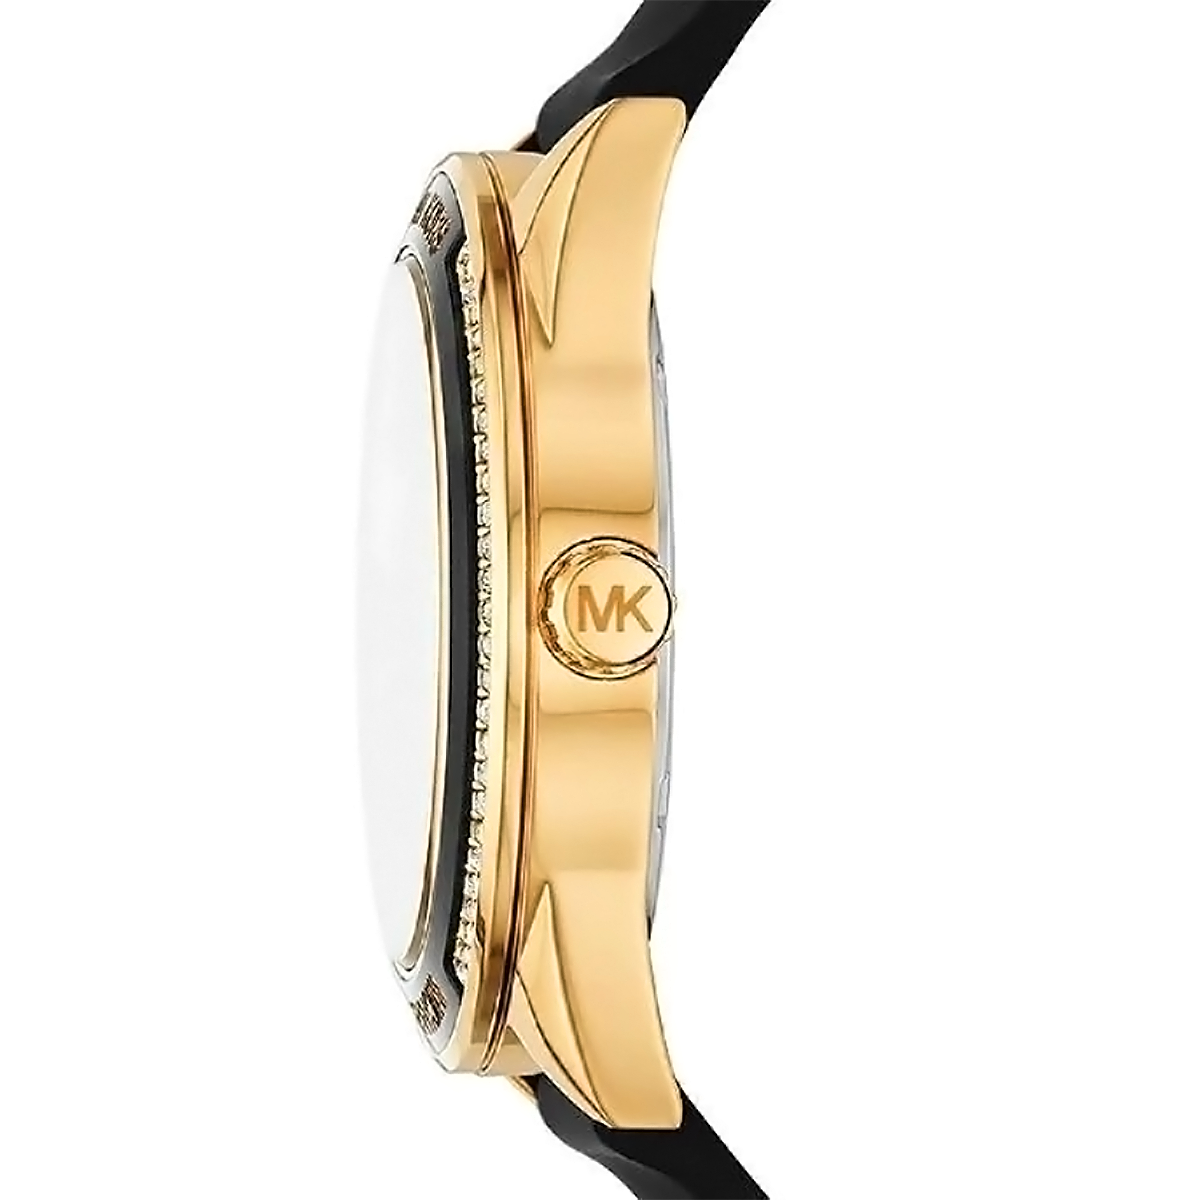 Women's wristwatch Michael Kors with silicone strap